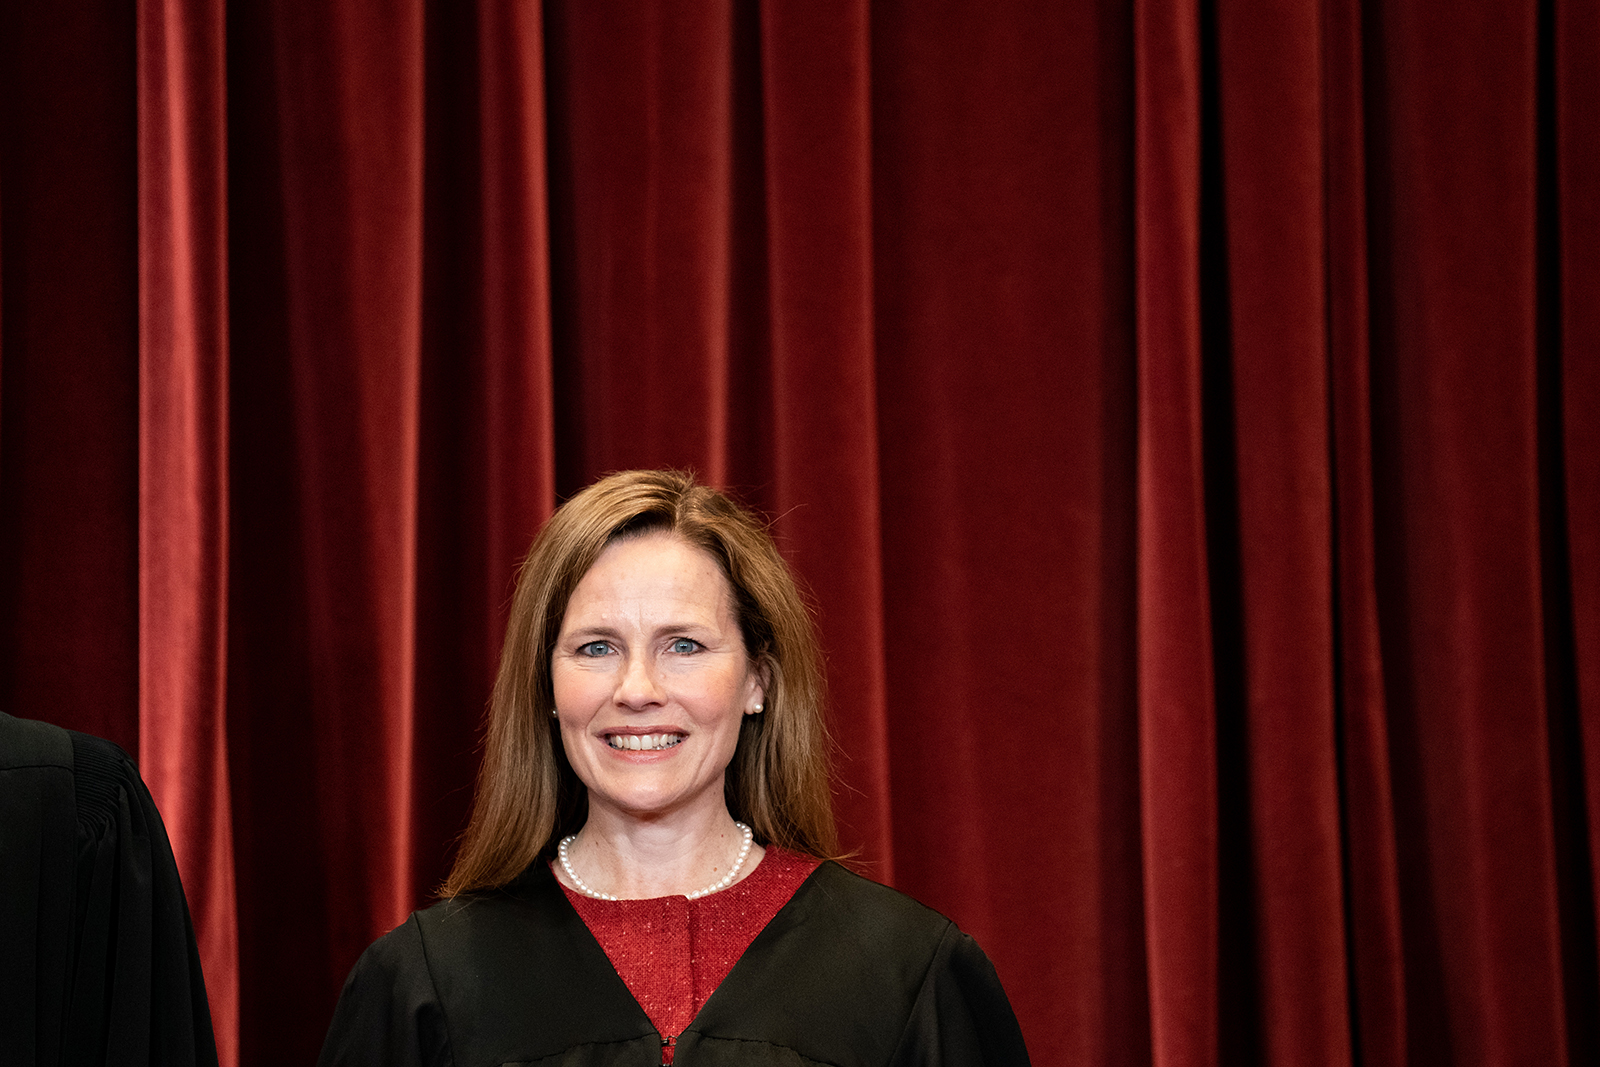 Associate Justice Amy Coney Barrett at the Supreme Court in Washington, DC on April 23, 2021.